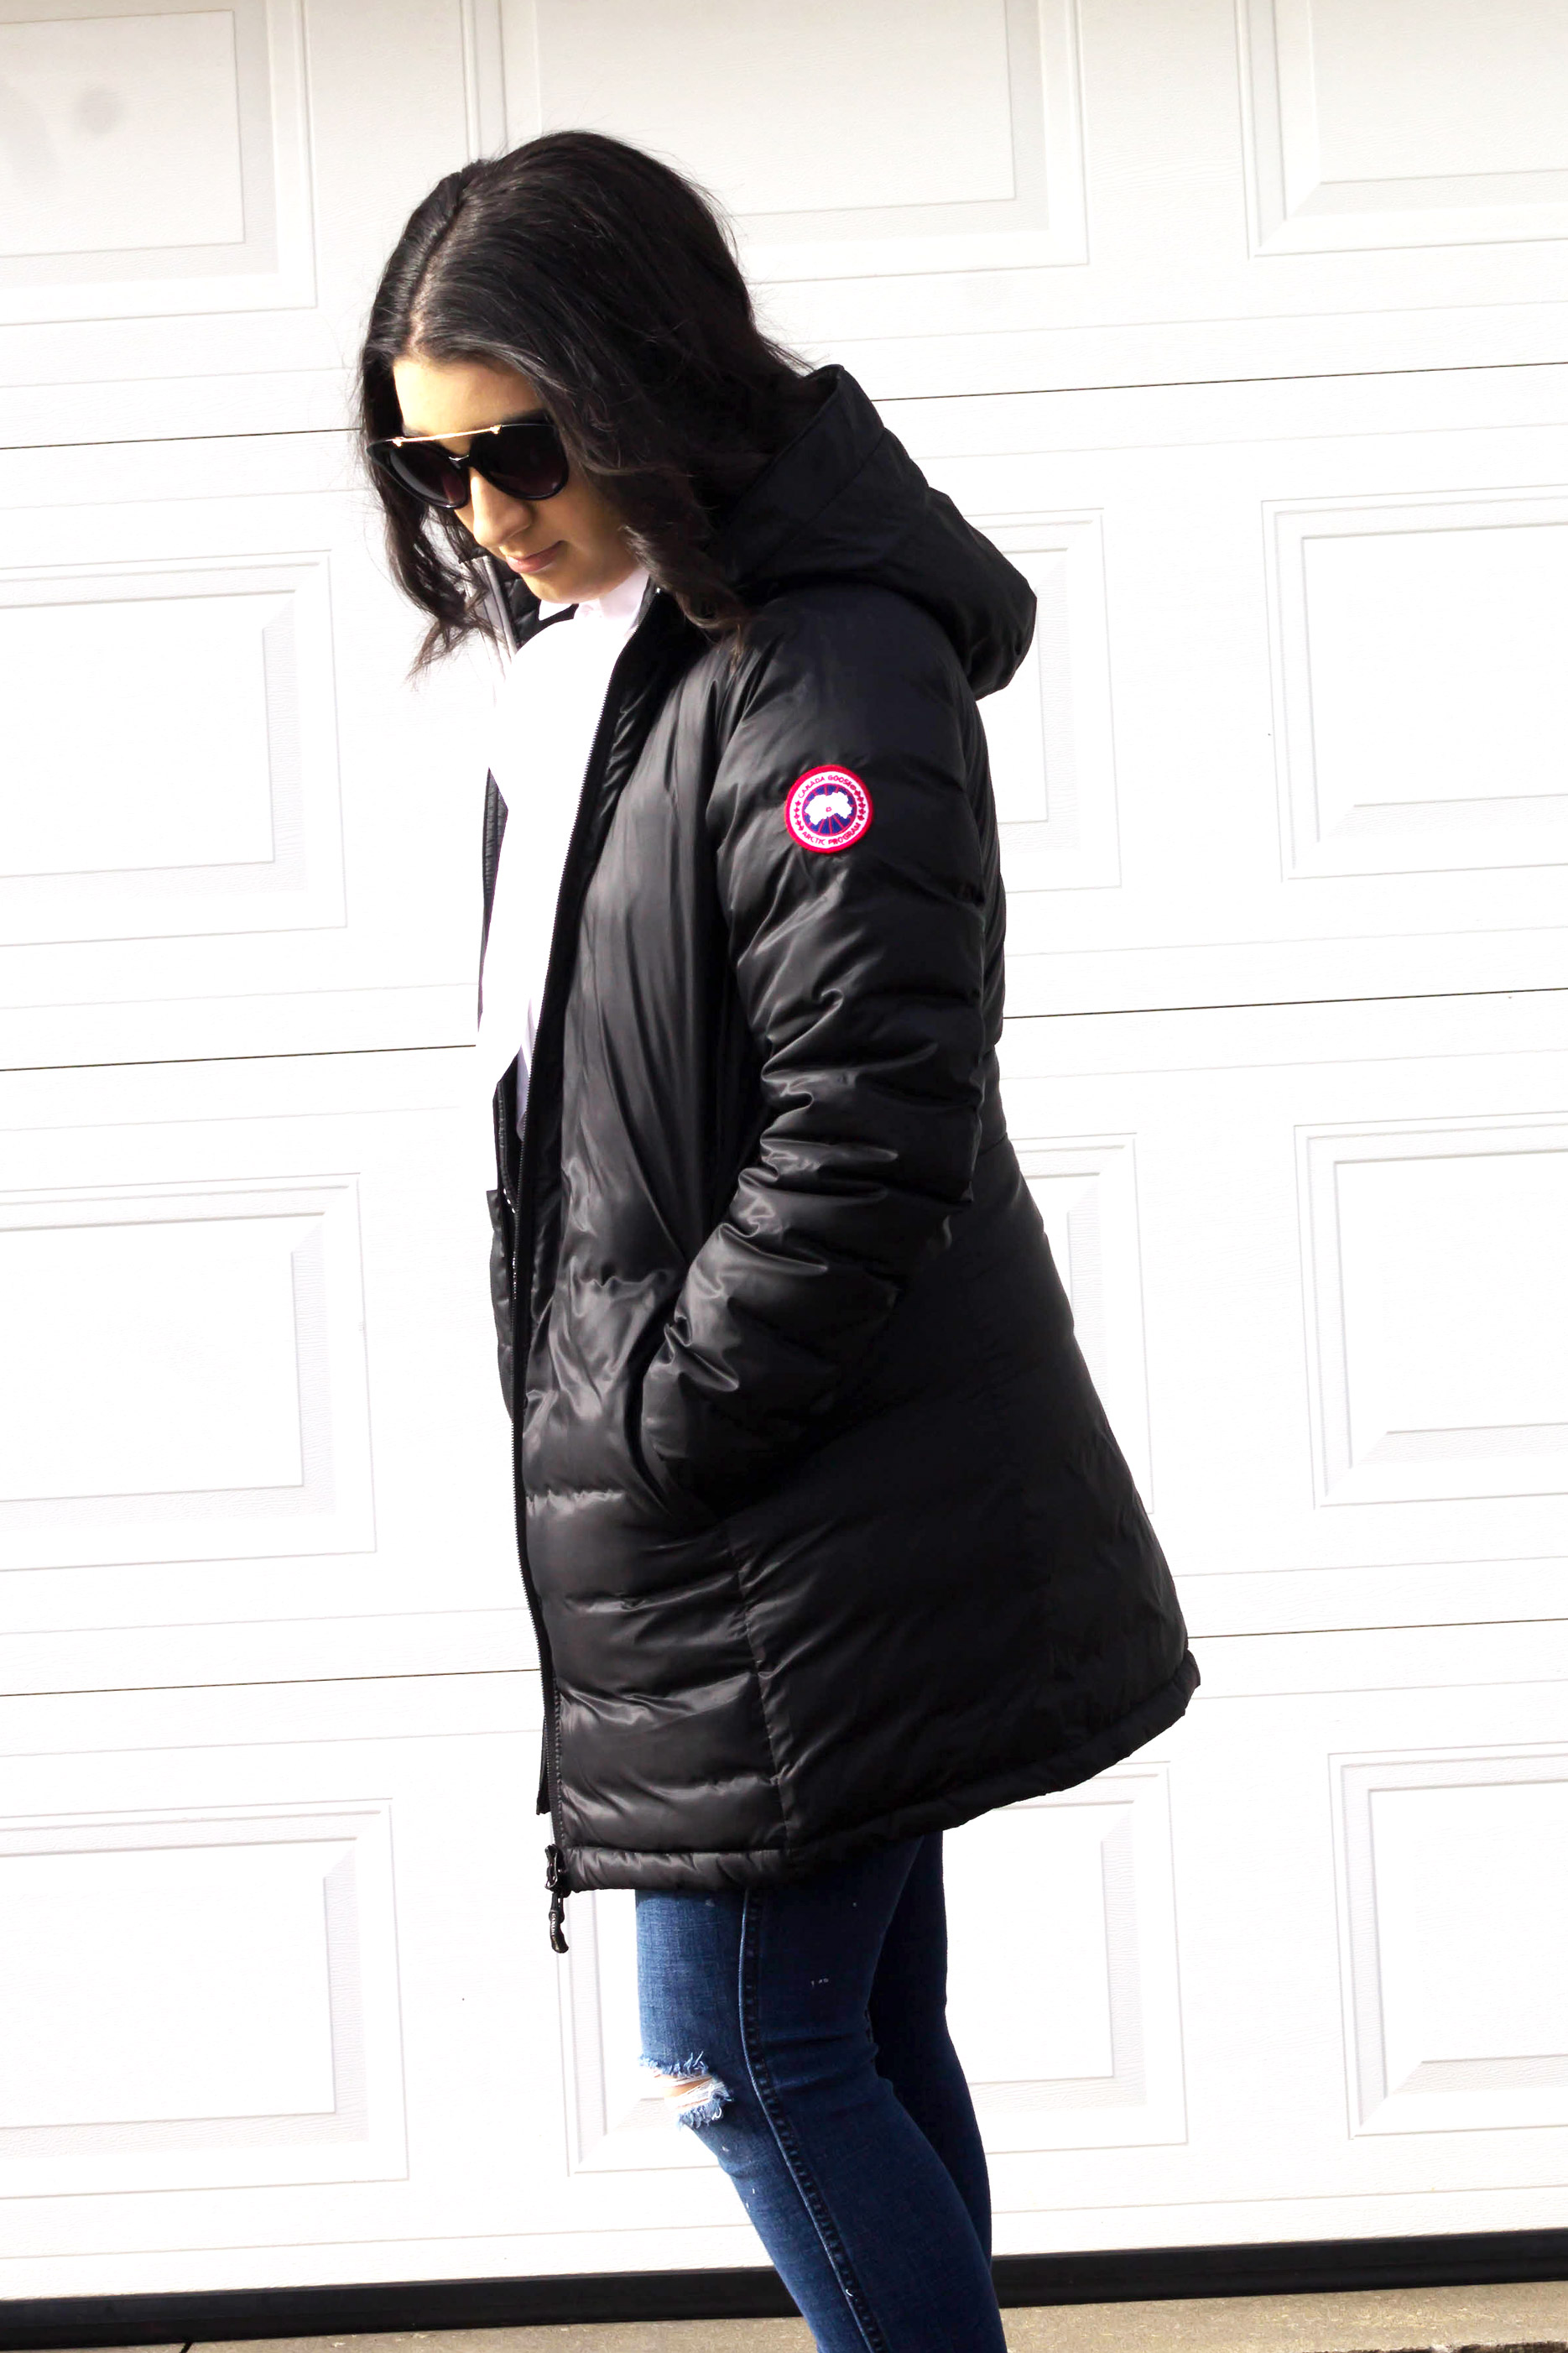 Buying and Selling Canada Goose Jackets